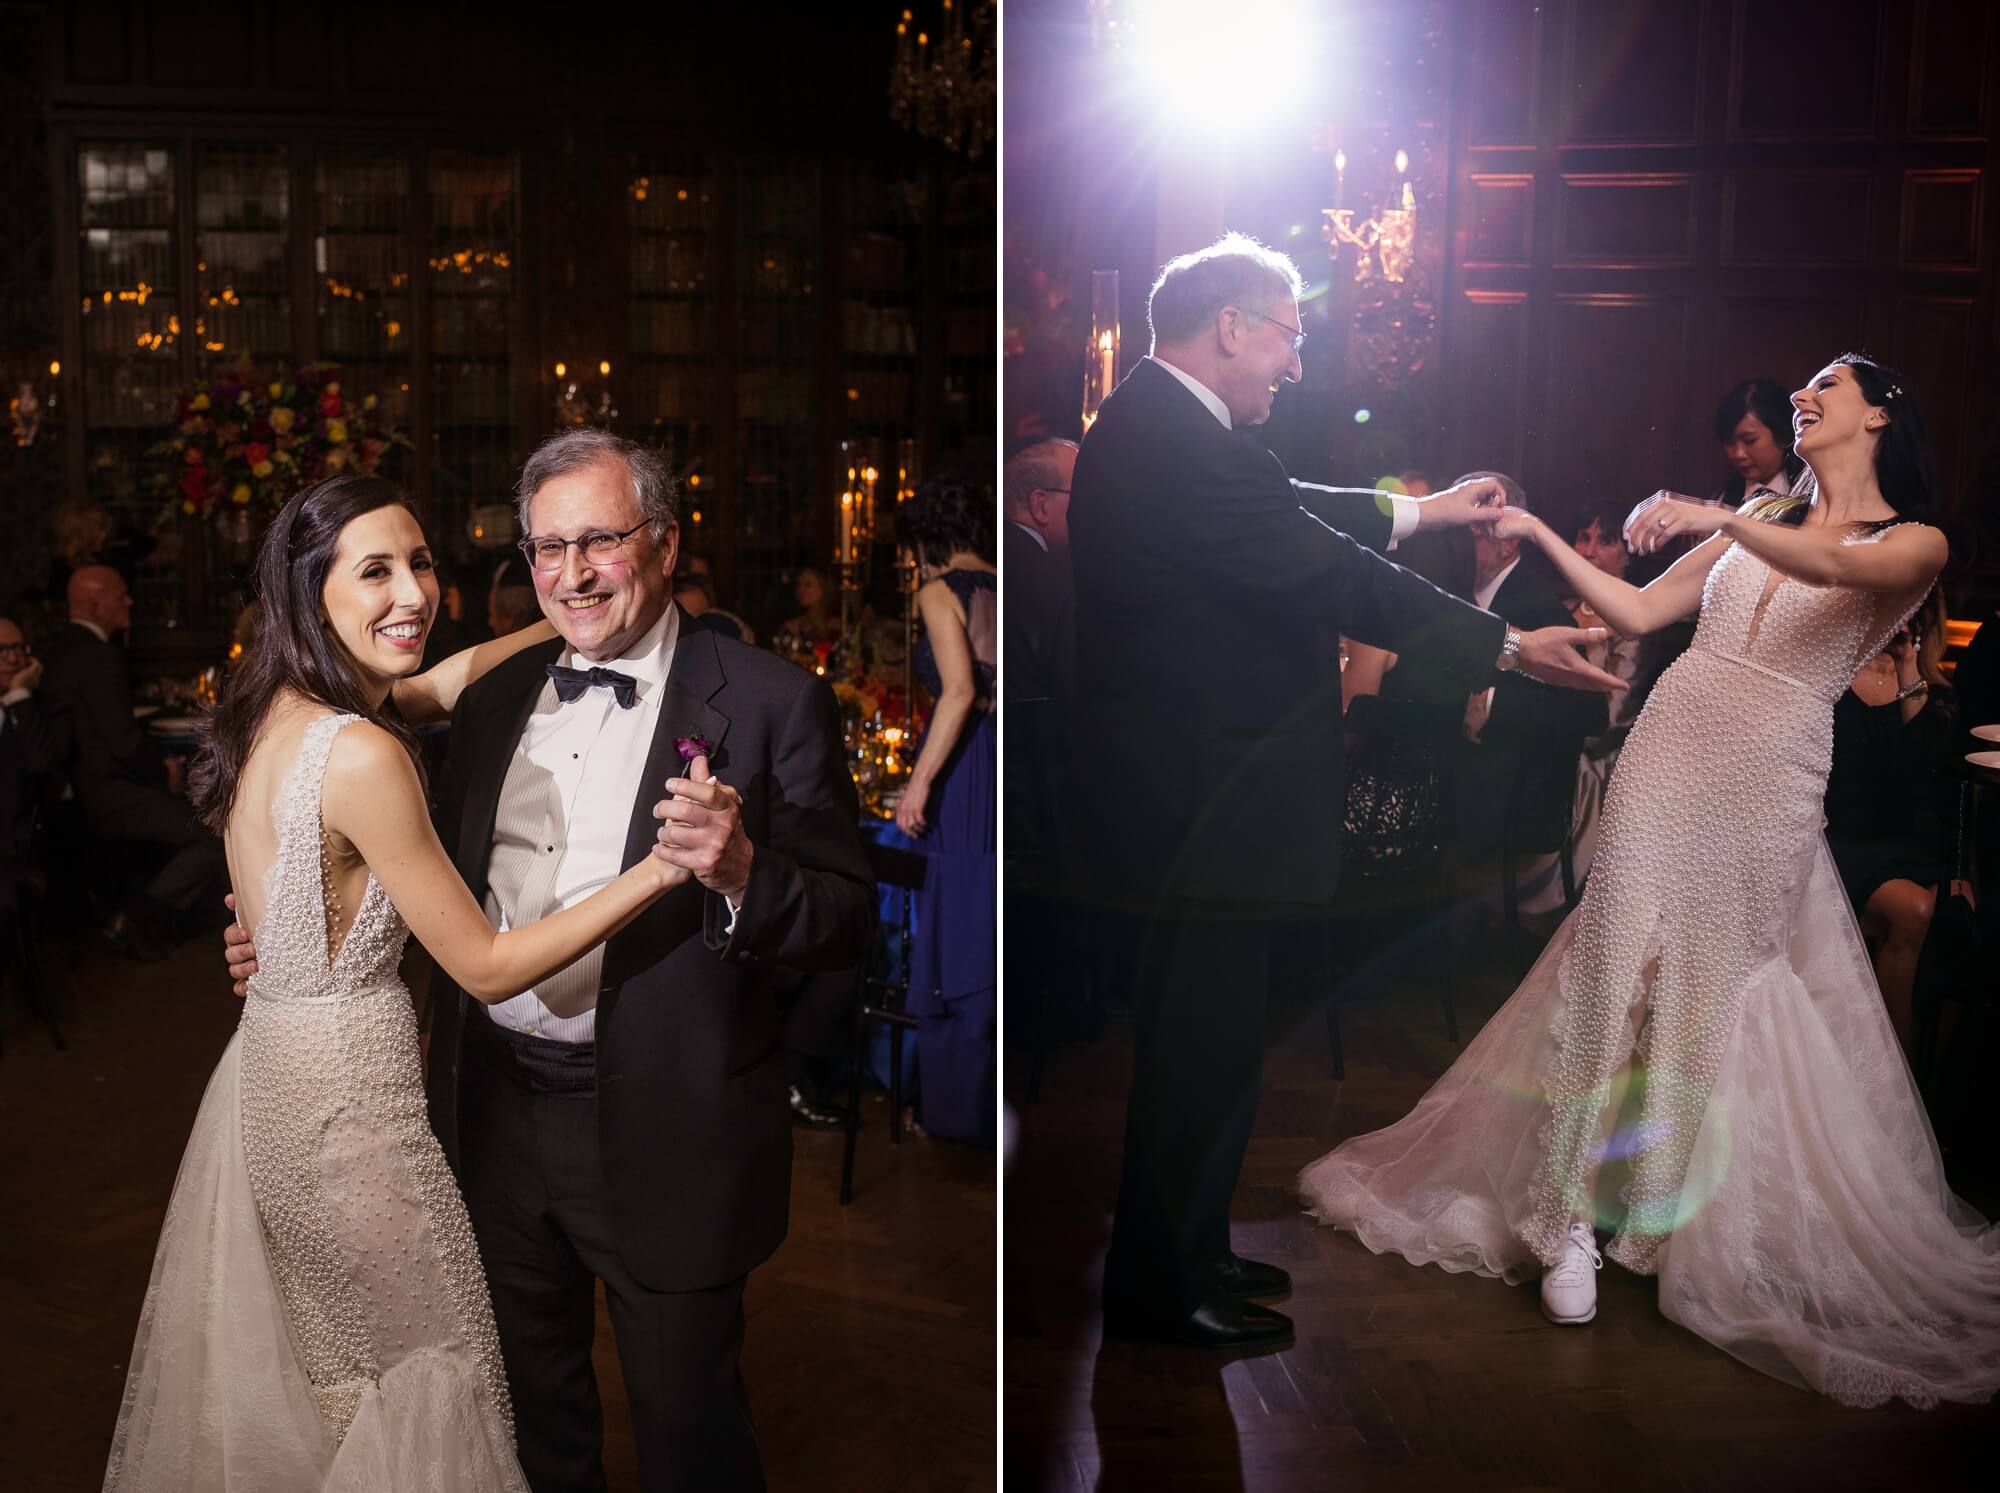 Brides dance with her father at Casa Loma in Toronto